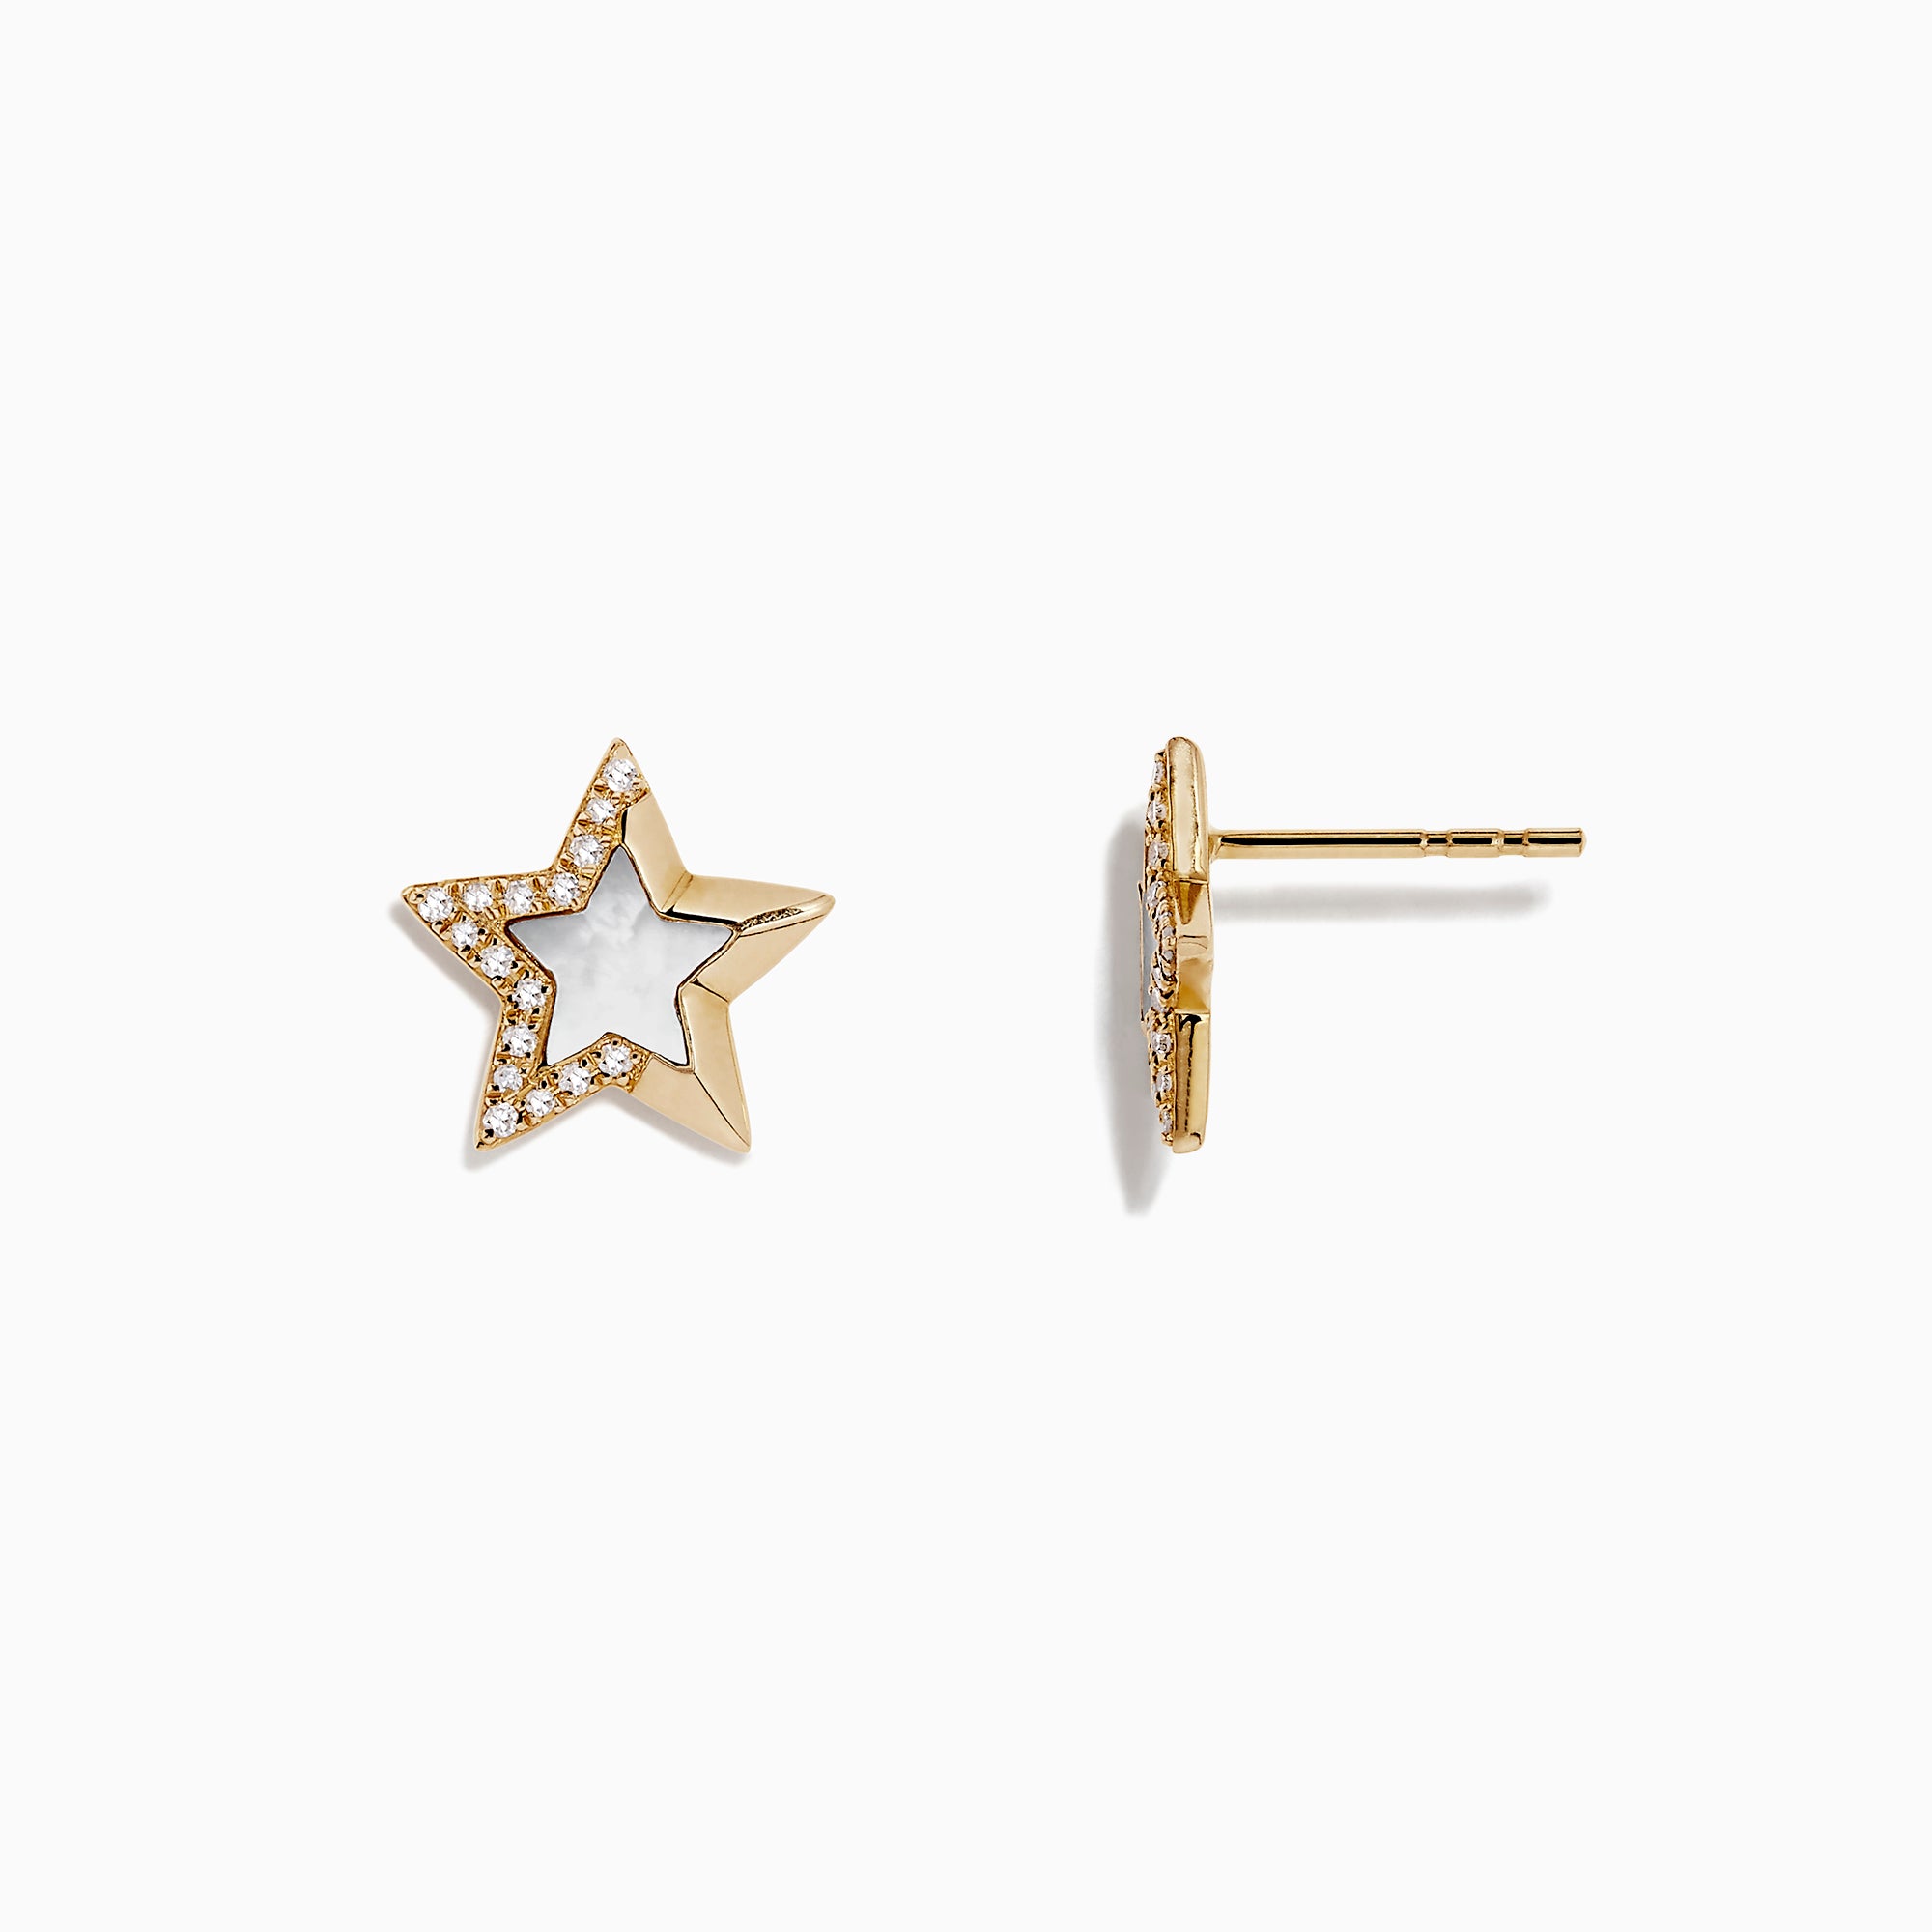 Effy Novelty 14K Gold Mother of Pearl and Diamond Star Earrings, 0.11 TCW